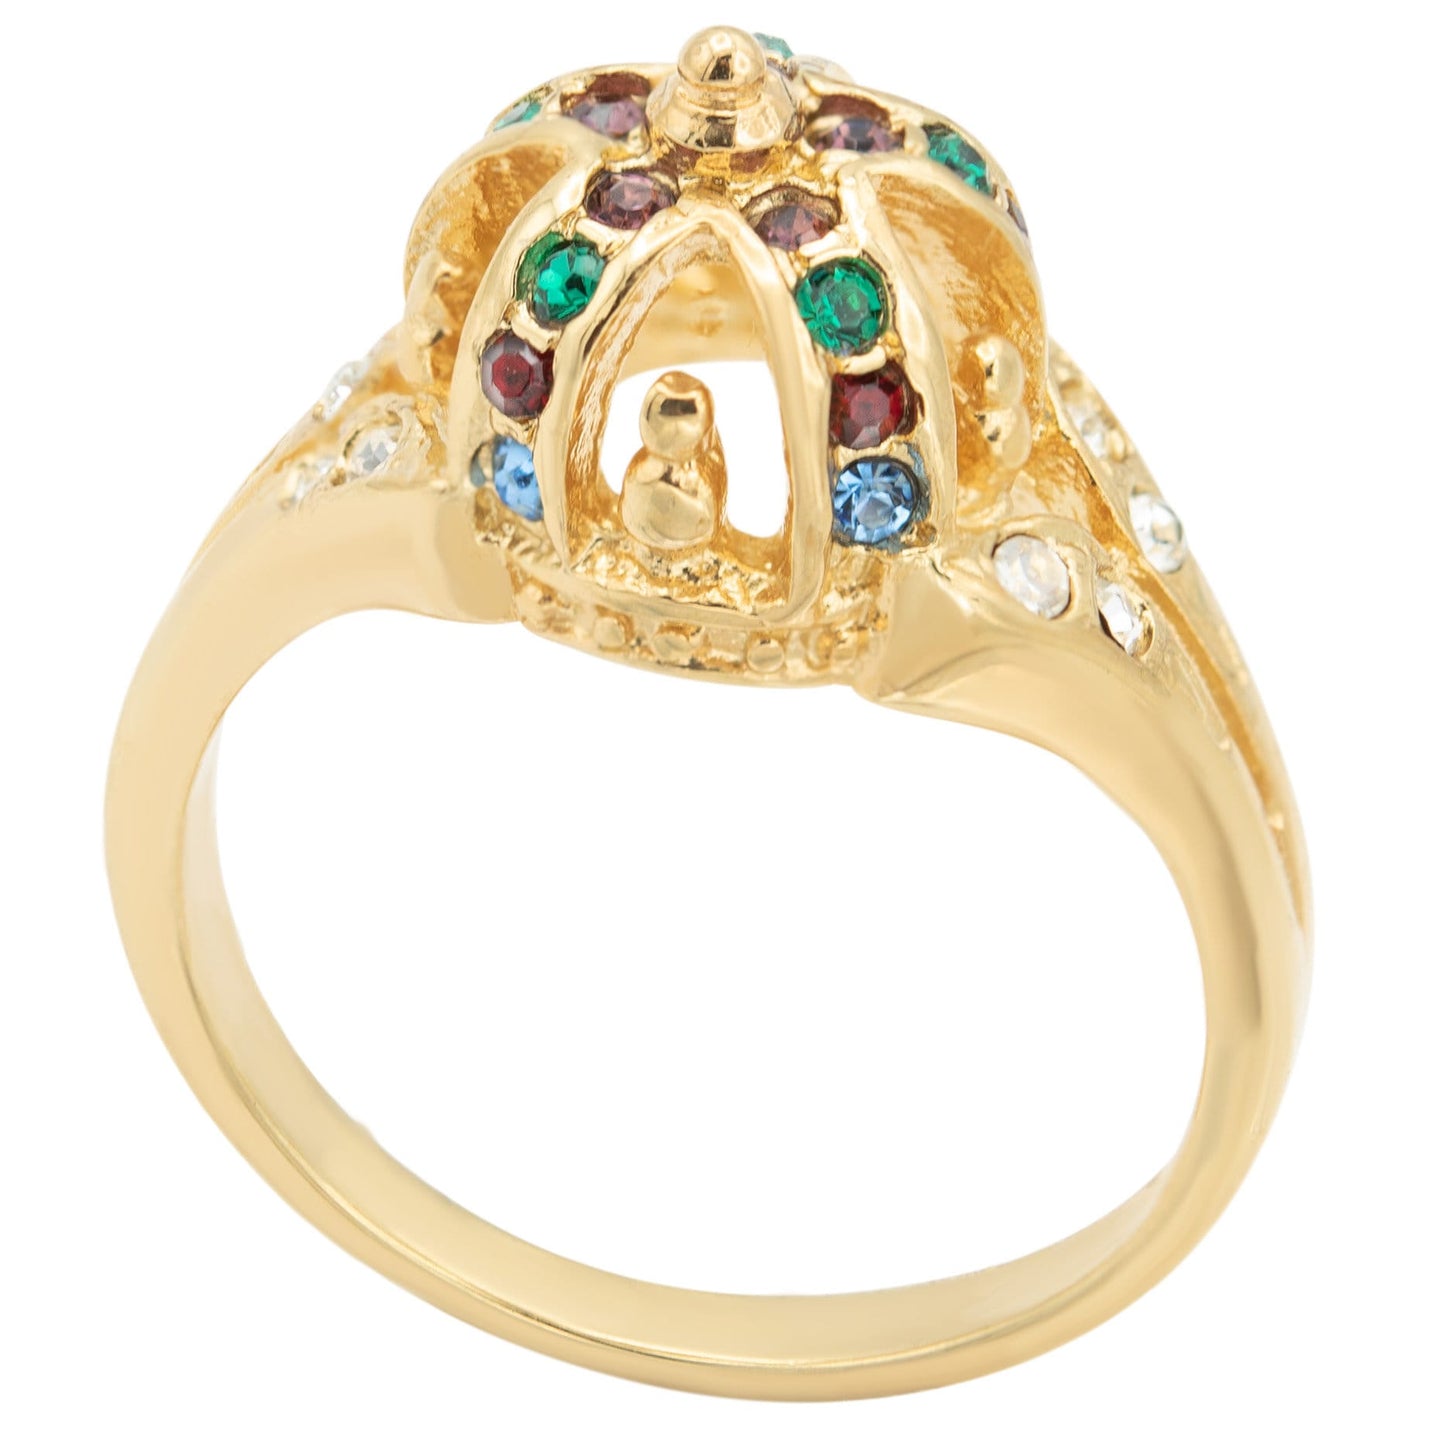 Vintage Royal King Queen Crown Ring Multi Colored Austrian Crystals 18k Gold 1970s Era Antique for Women #R3502